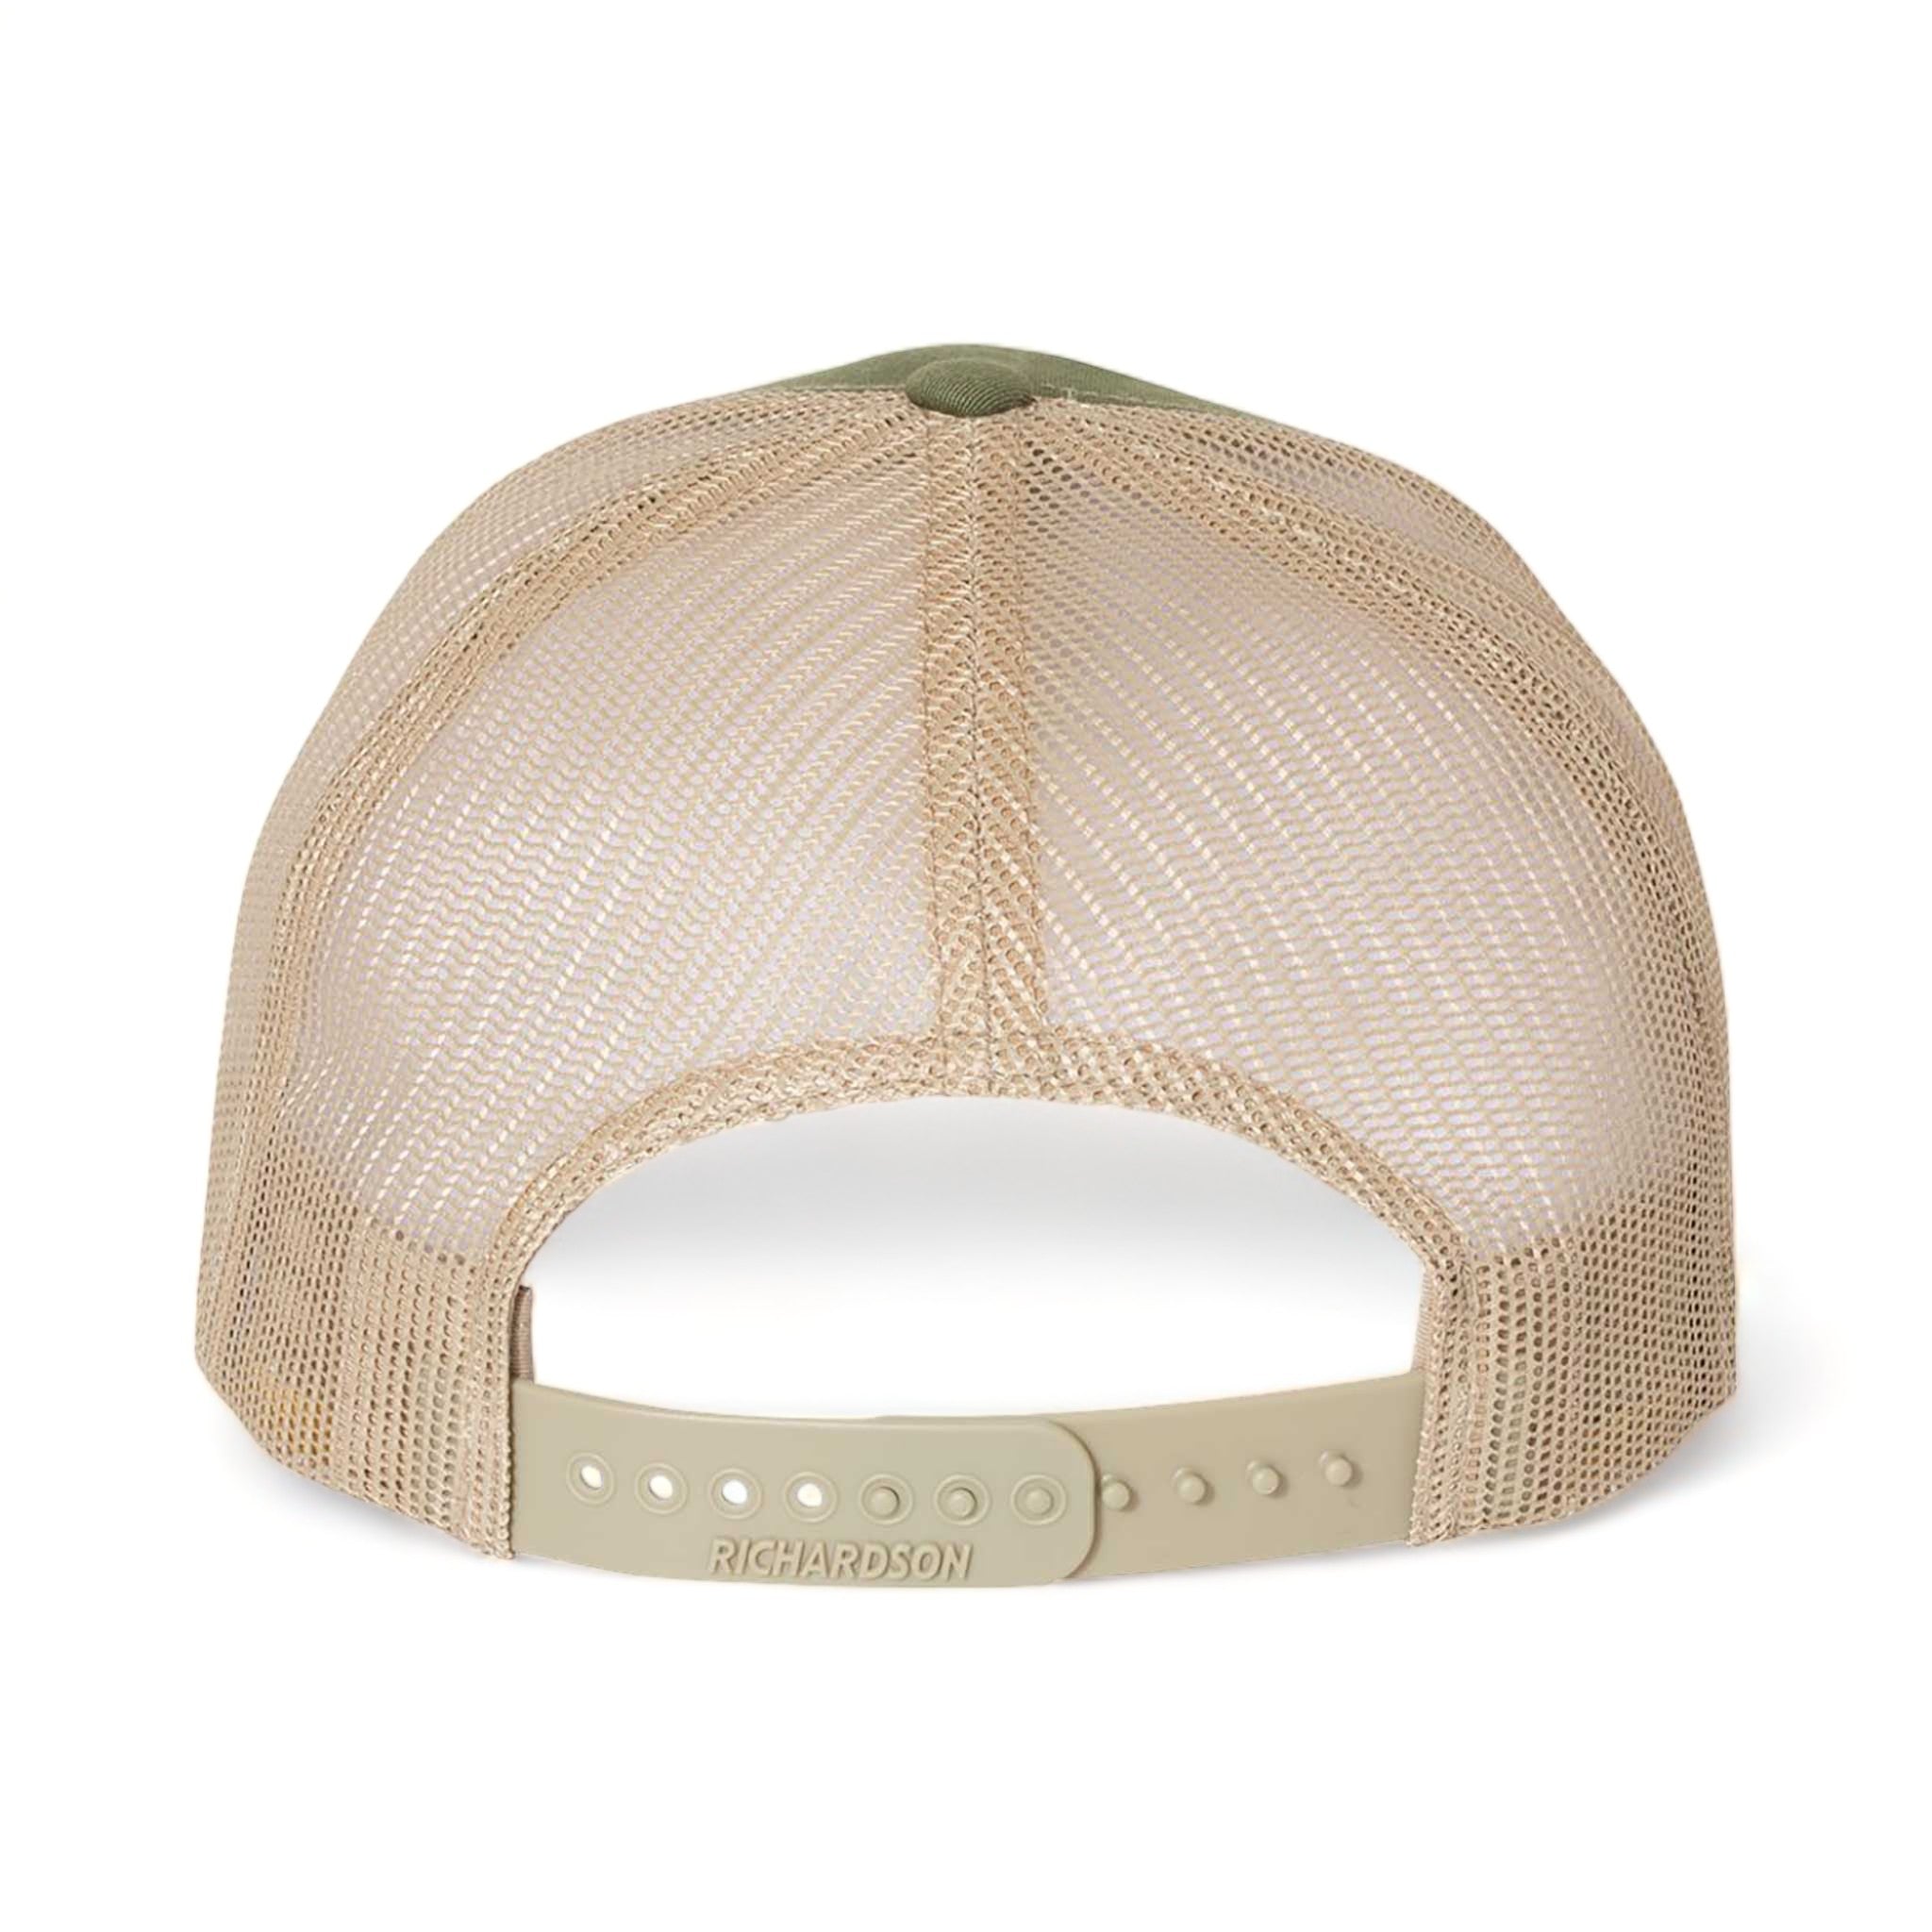 Back view of Richardson 112FP custom hat in army olive green and tan